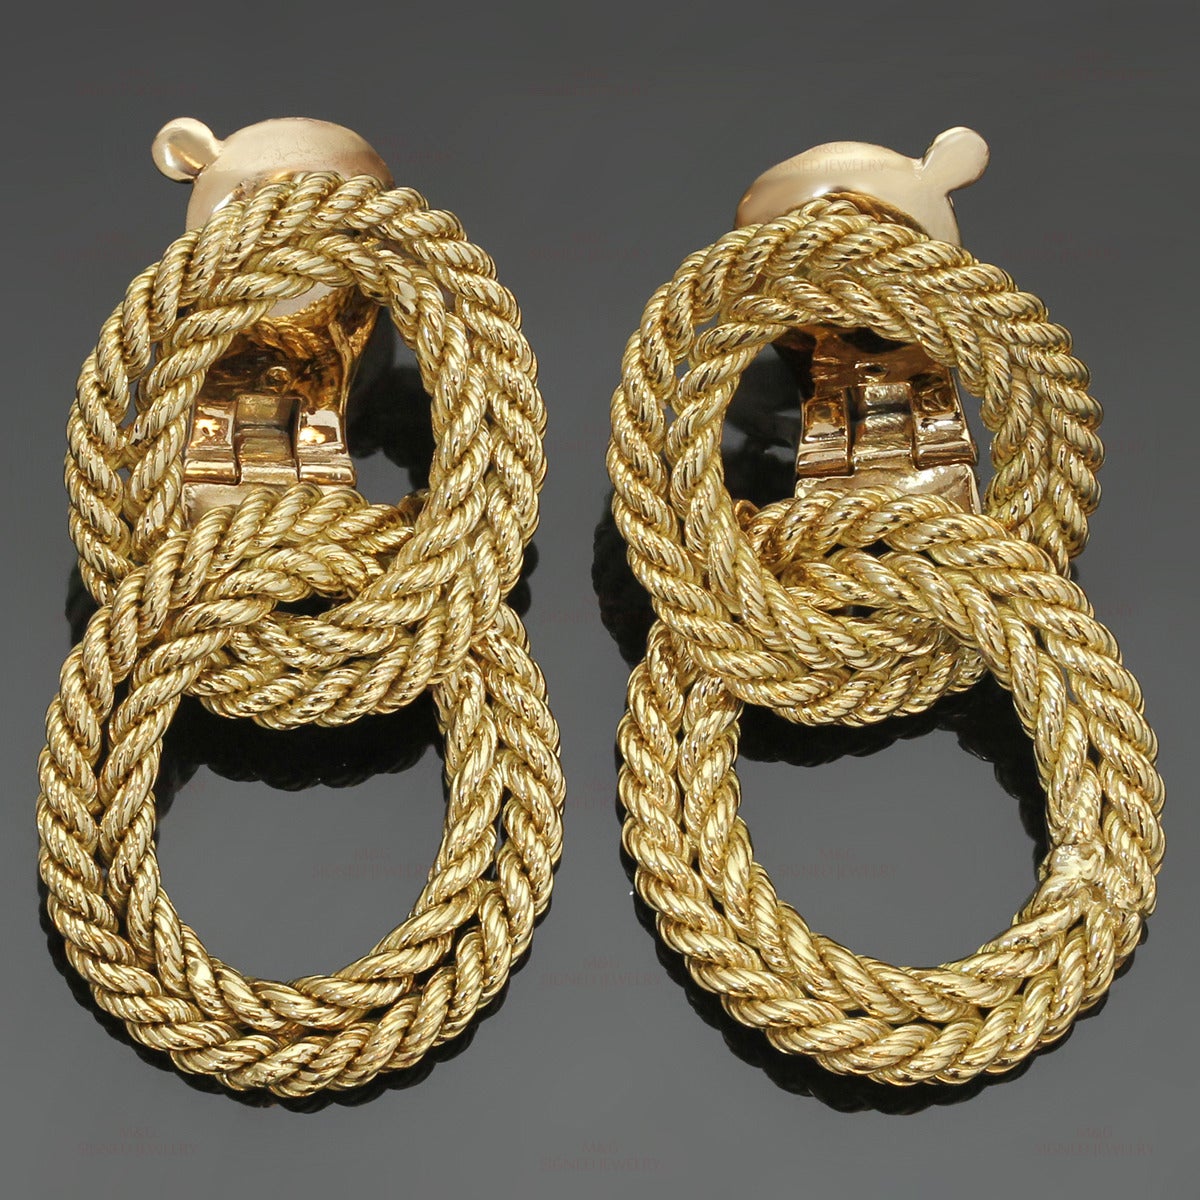 These fabulous vintage Tiffany & Co. clip-on earrings feature a door-knocker design composed of oval braided loops crafted in 18k yellow gold. Made in France circa 1950s. Measurements: 0.90